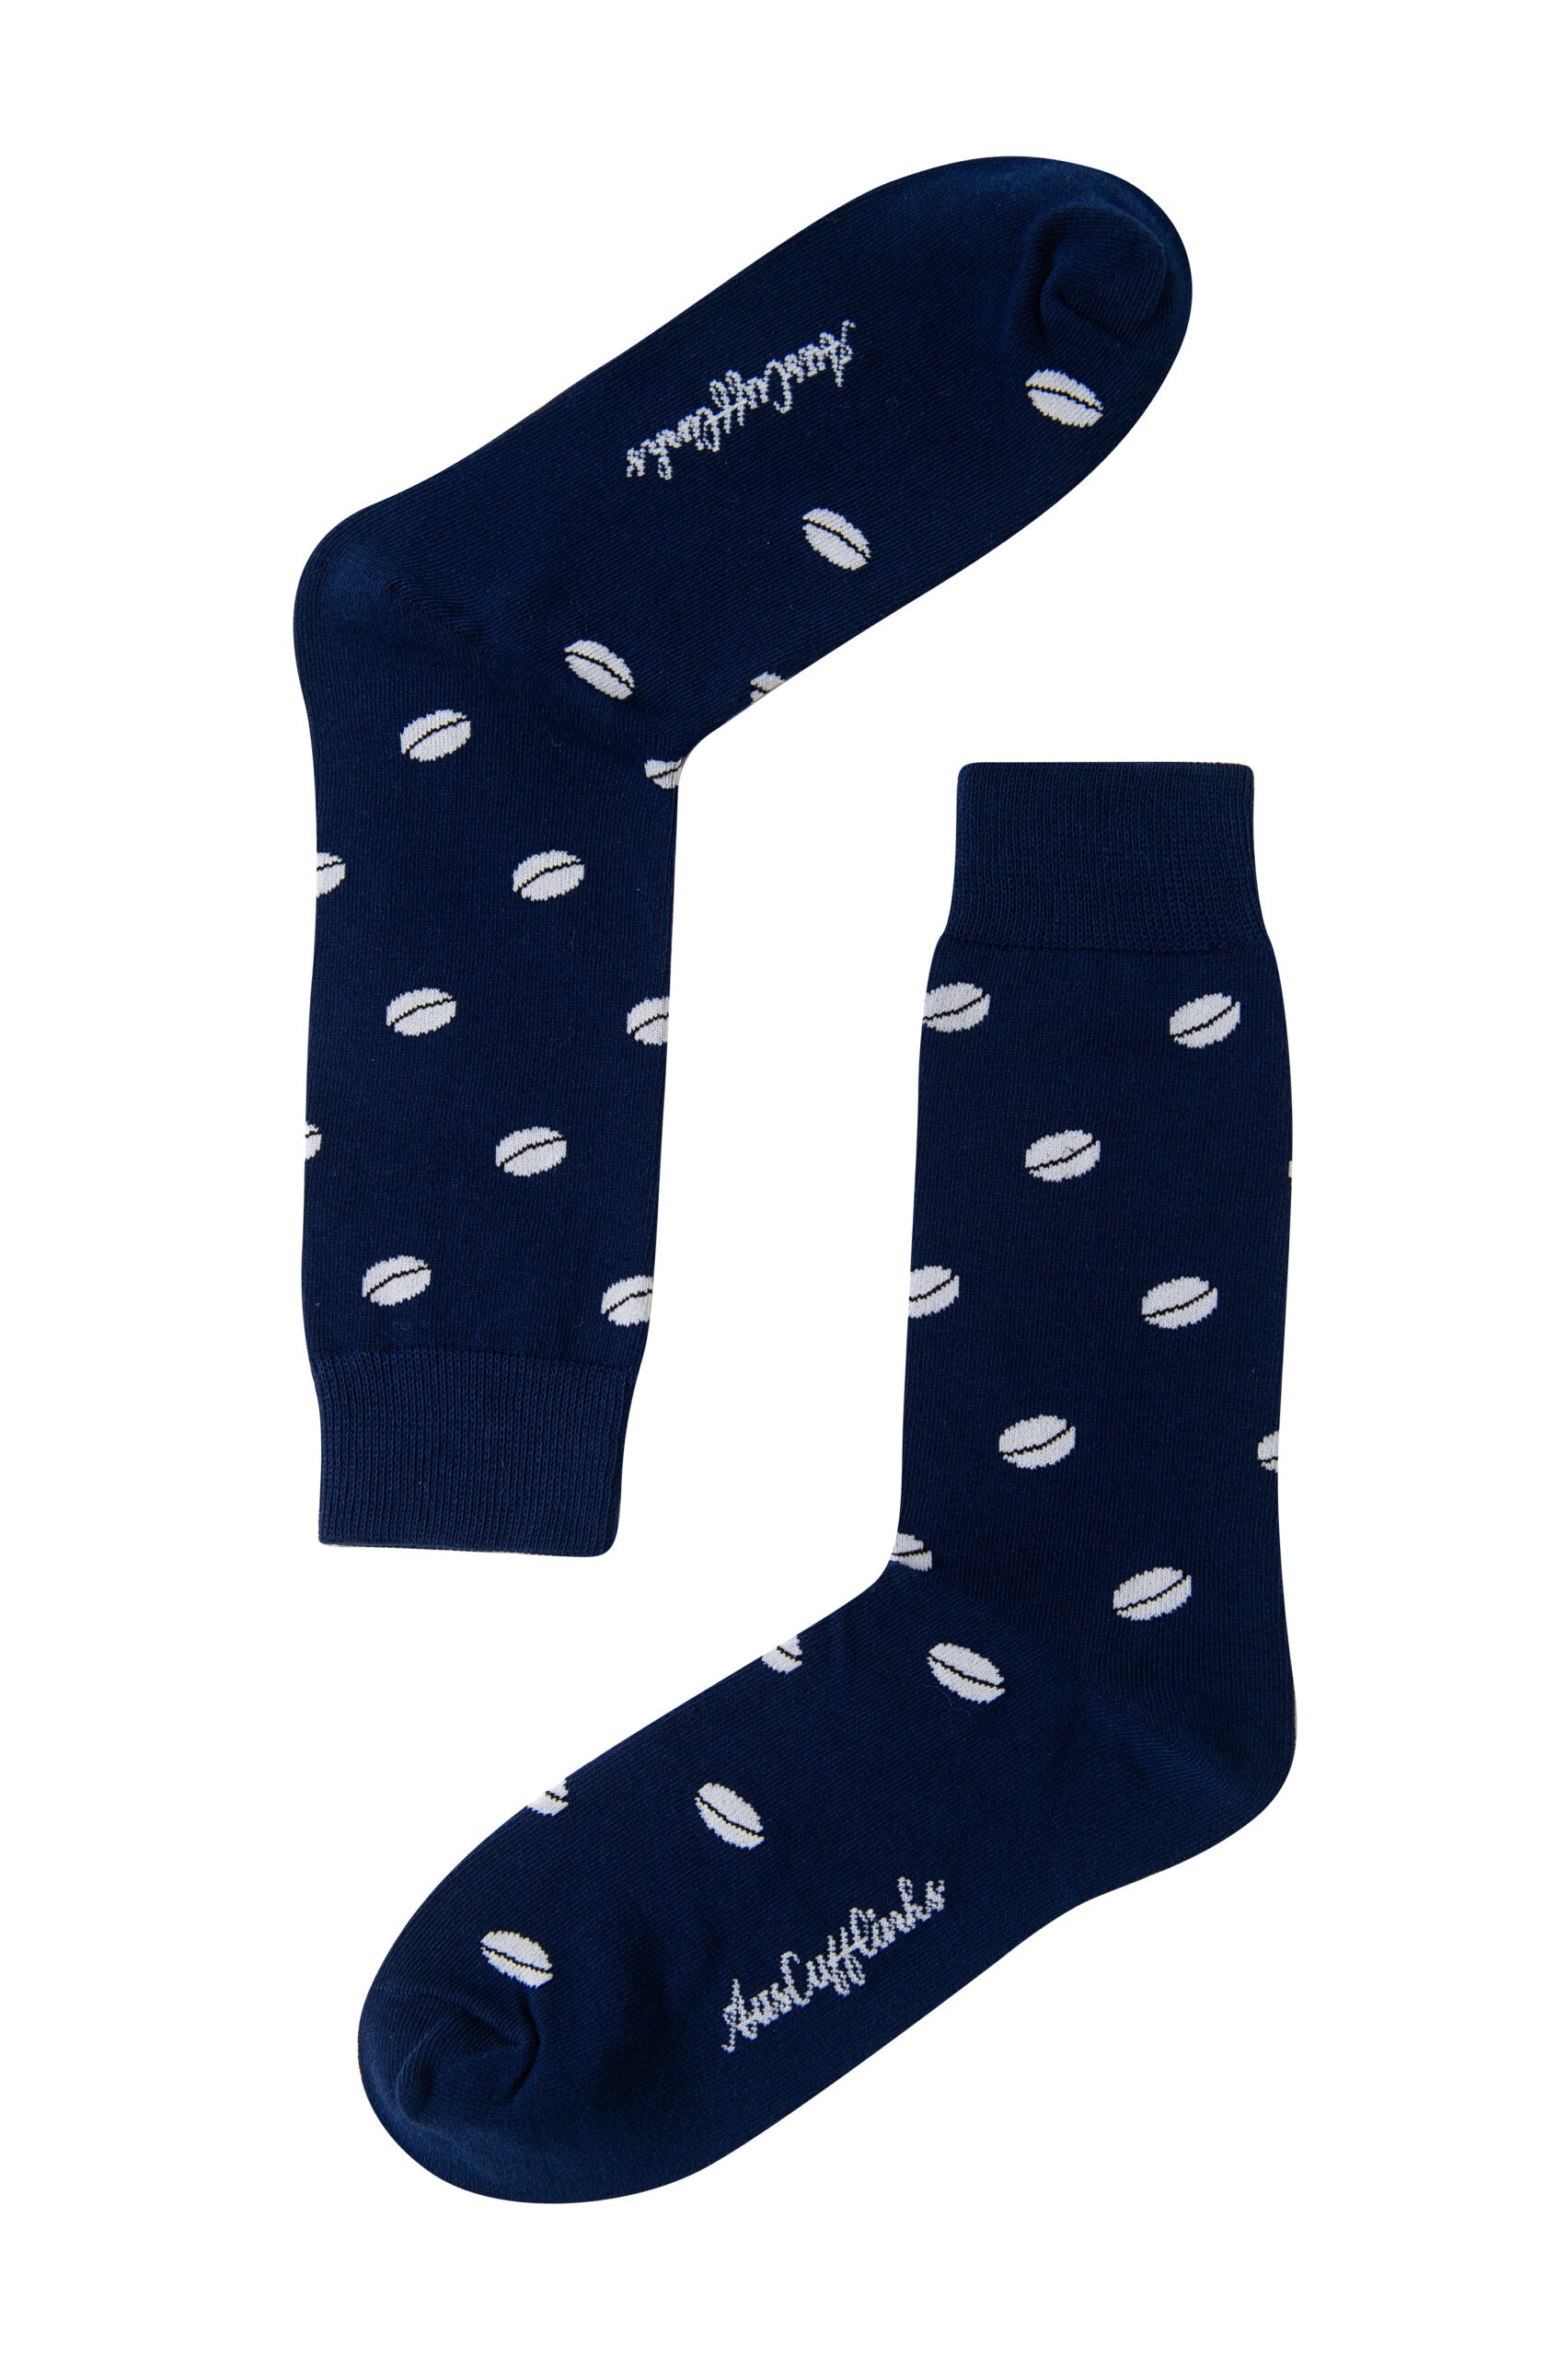 A pair of Rugby Socks with a white polka dot pattern and a sporty logo near the toe on an isolated white background.